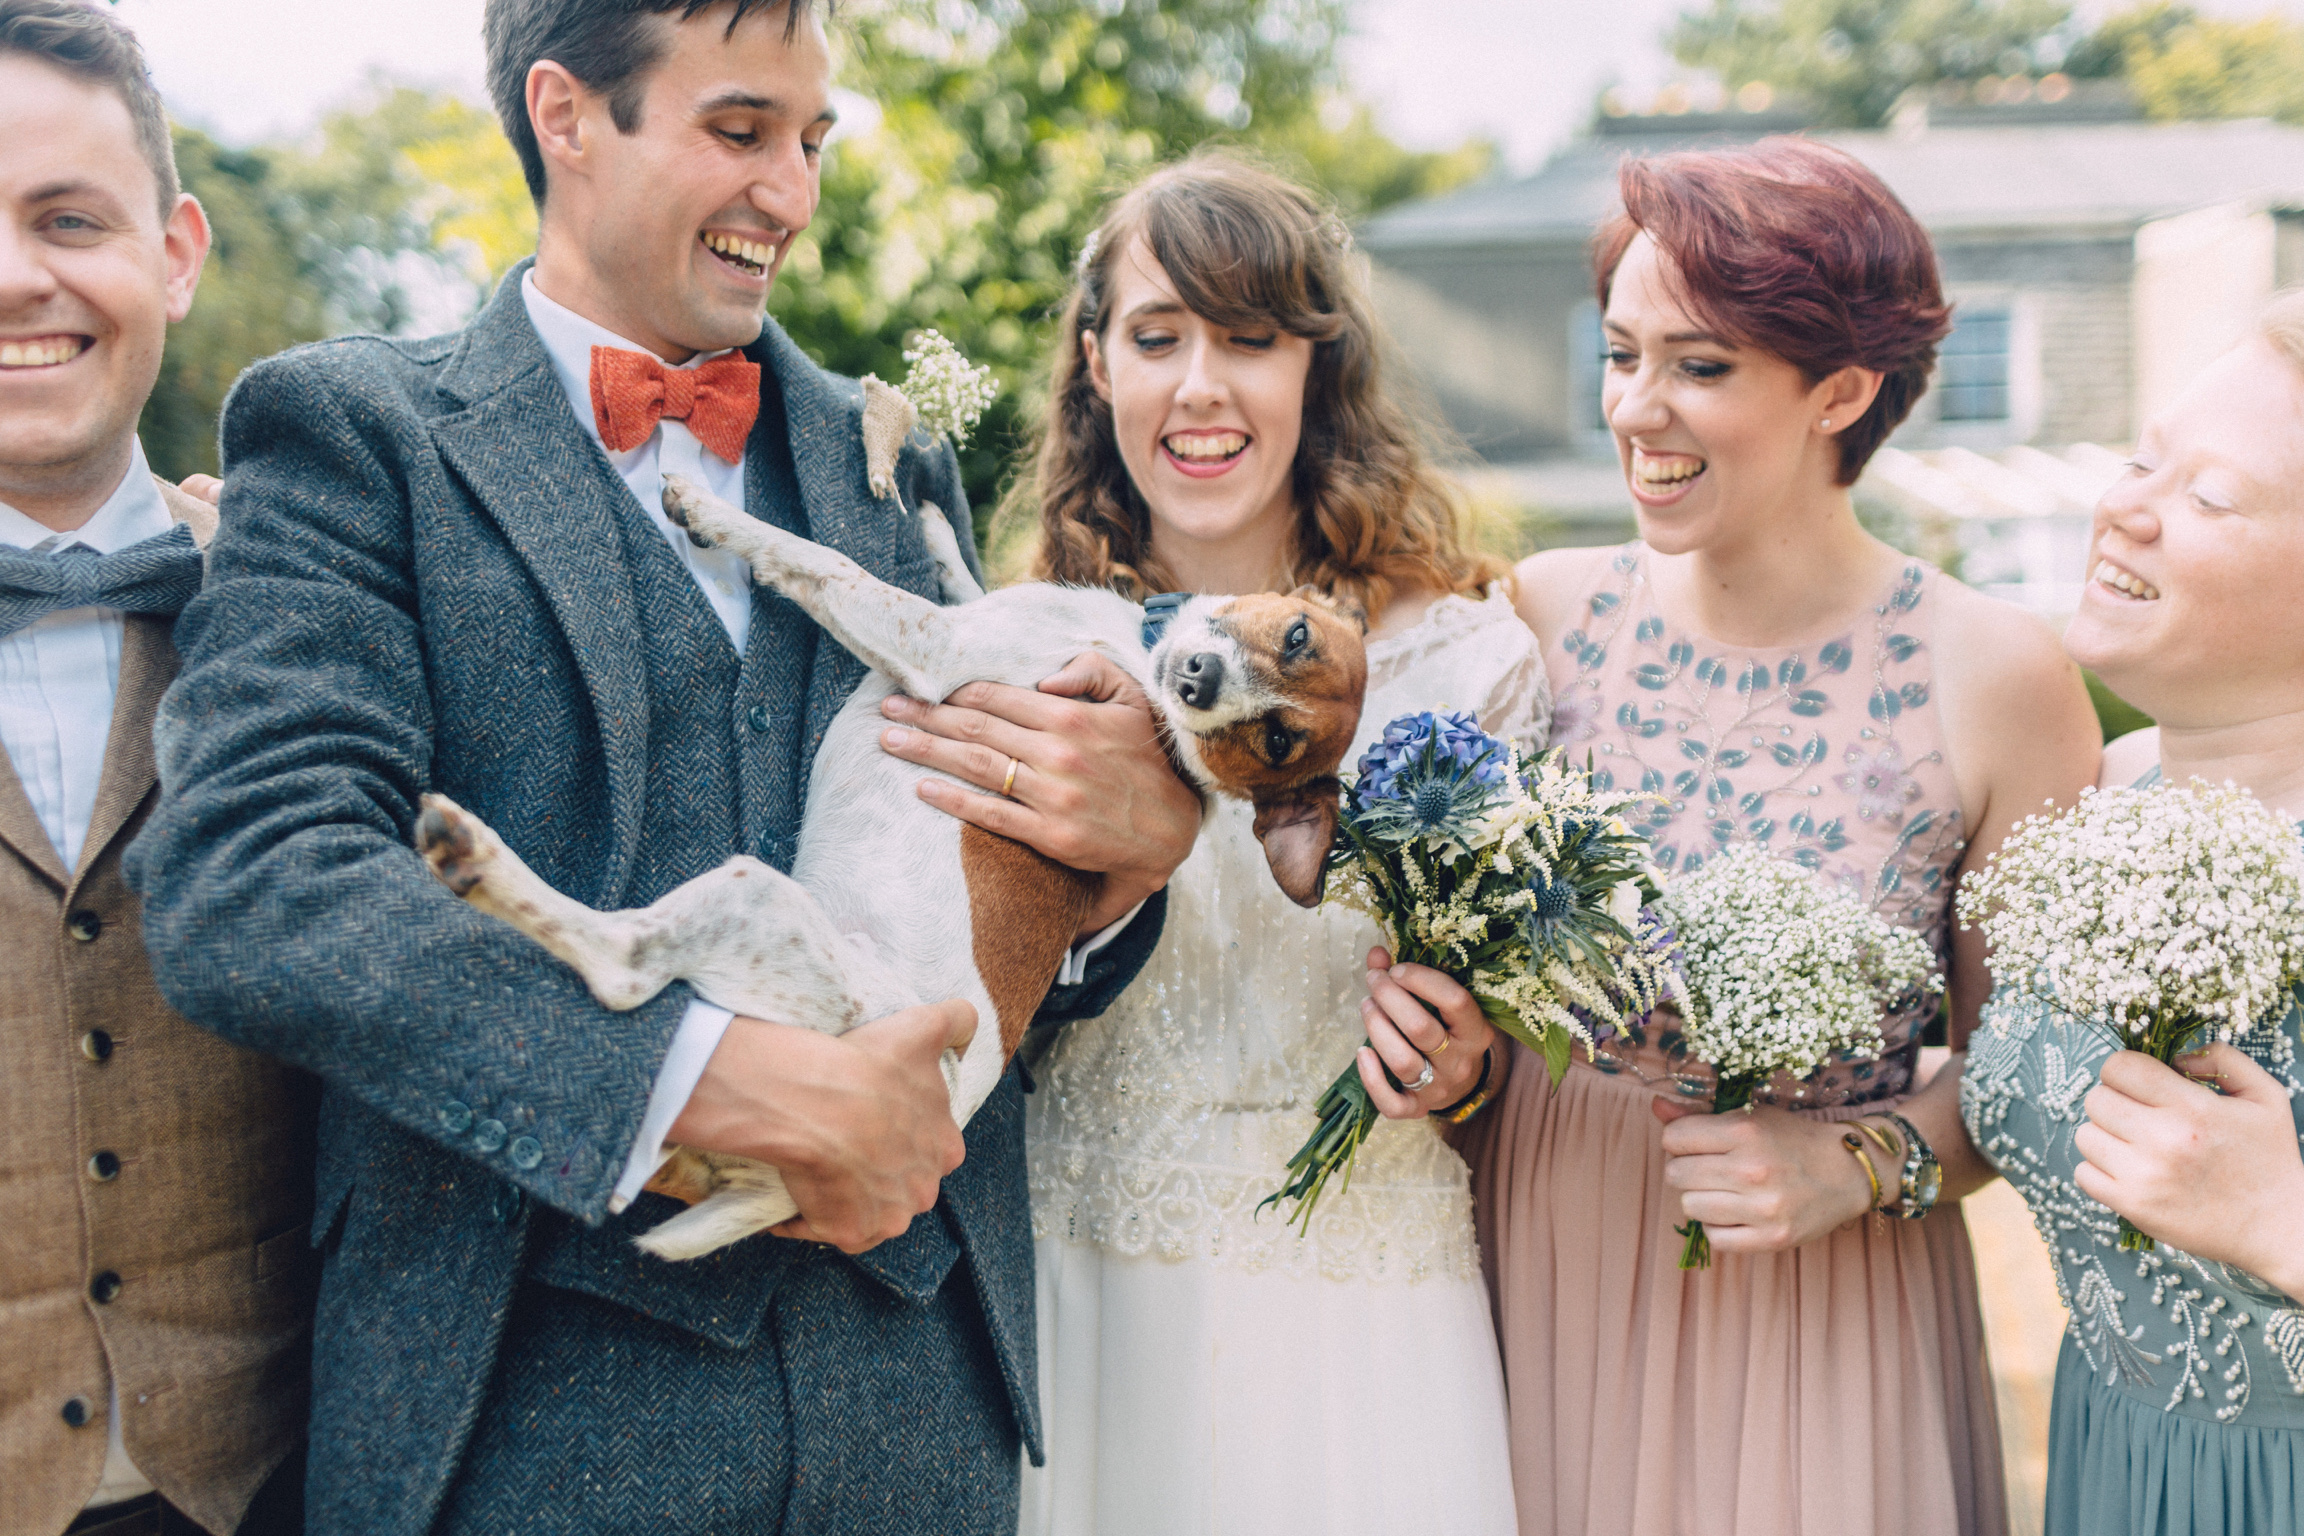 Newly weds holding a dog while bridal party smiles